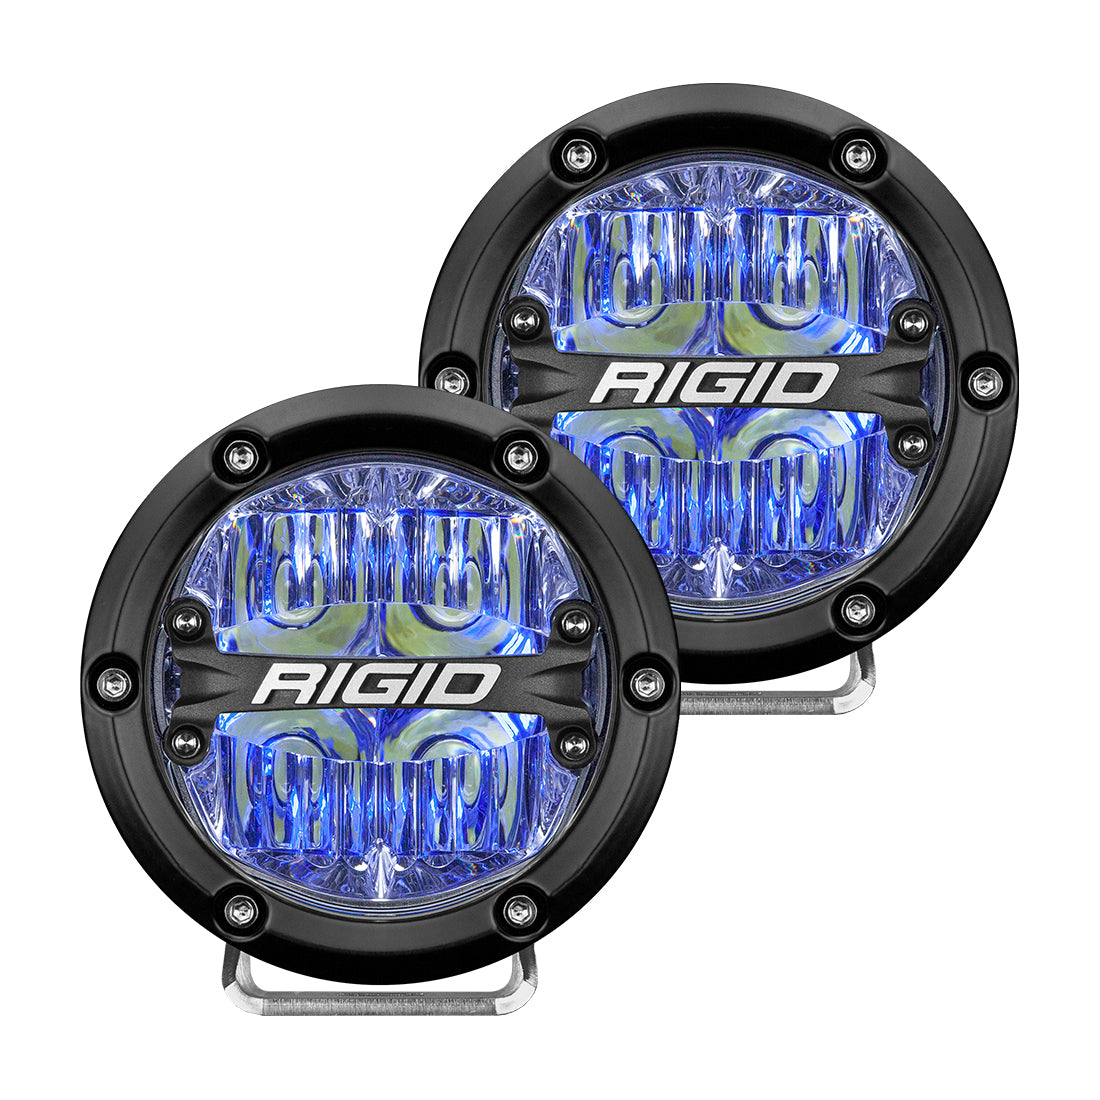 360-Series 4 Inch Off-Road LED Light, Drive Beam, Blue Backlight, Pair